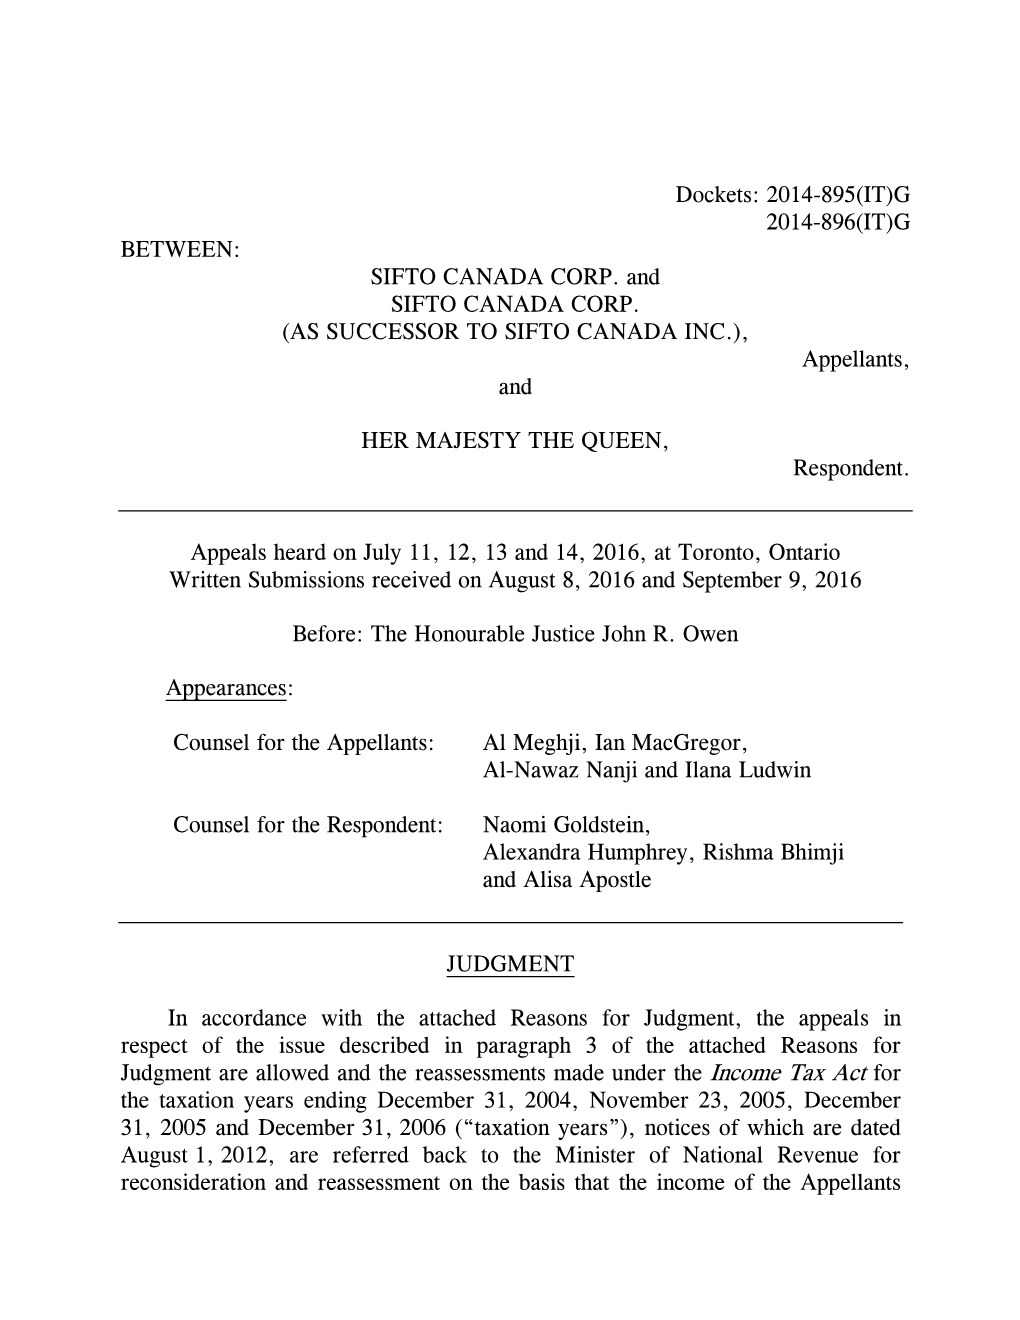 (AS SUCCESSOR to SIFTO CANADA INC.), Appellants, And